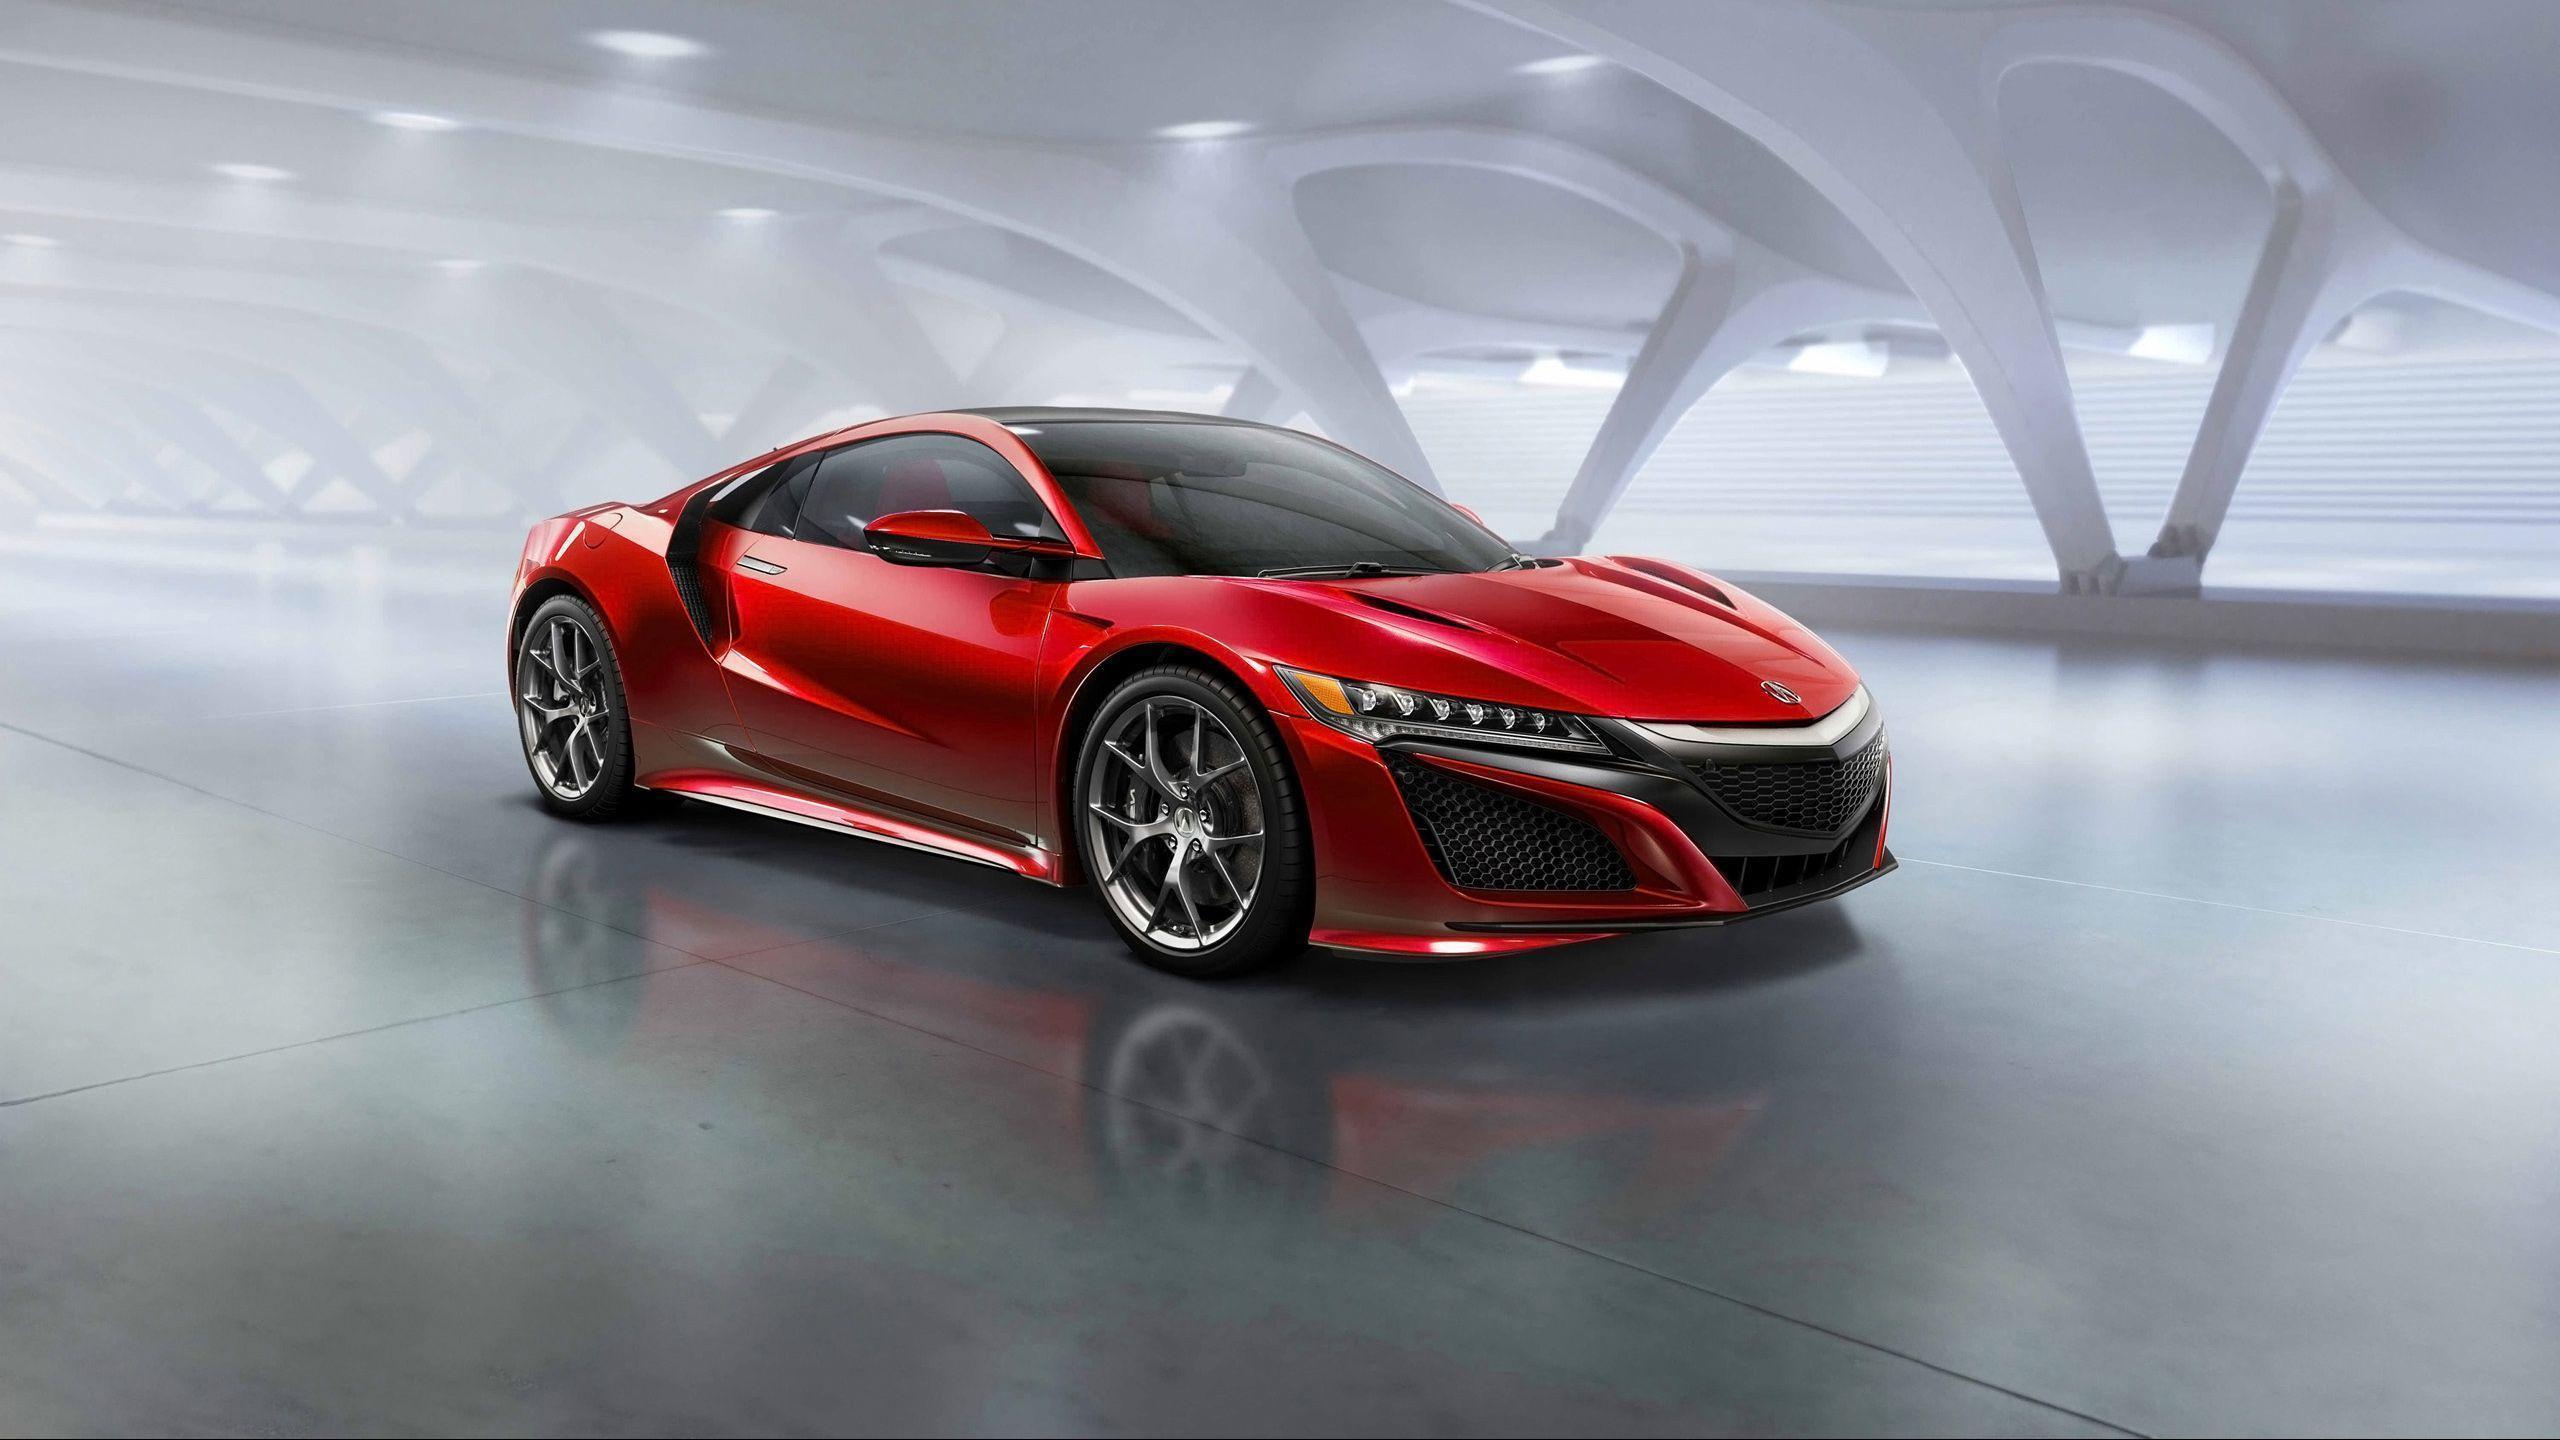 Acura NSX 2K wallpapers free download